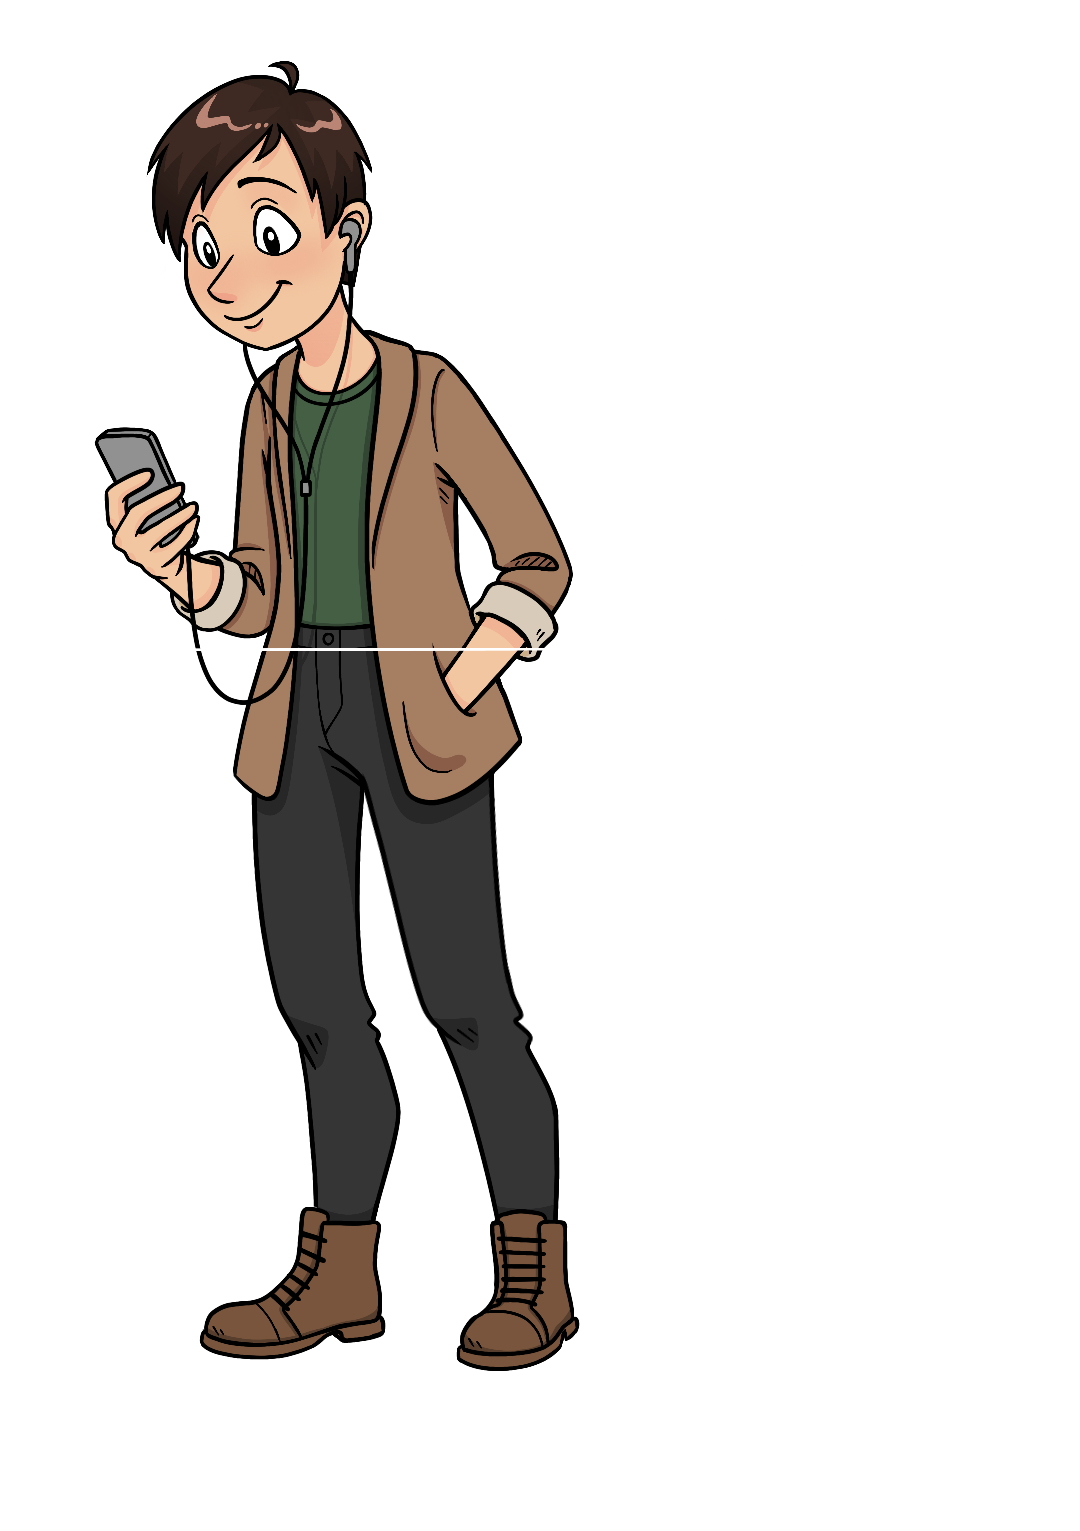 Example of half body and full body portrait of a human.